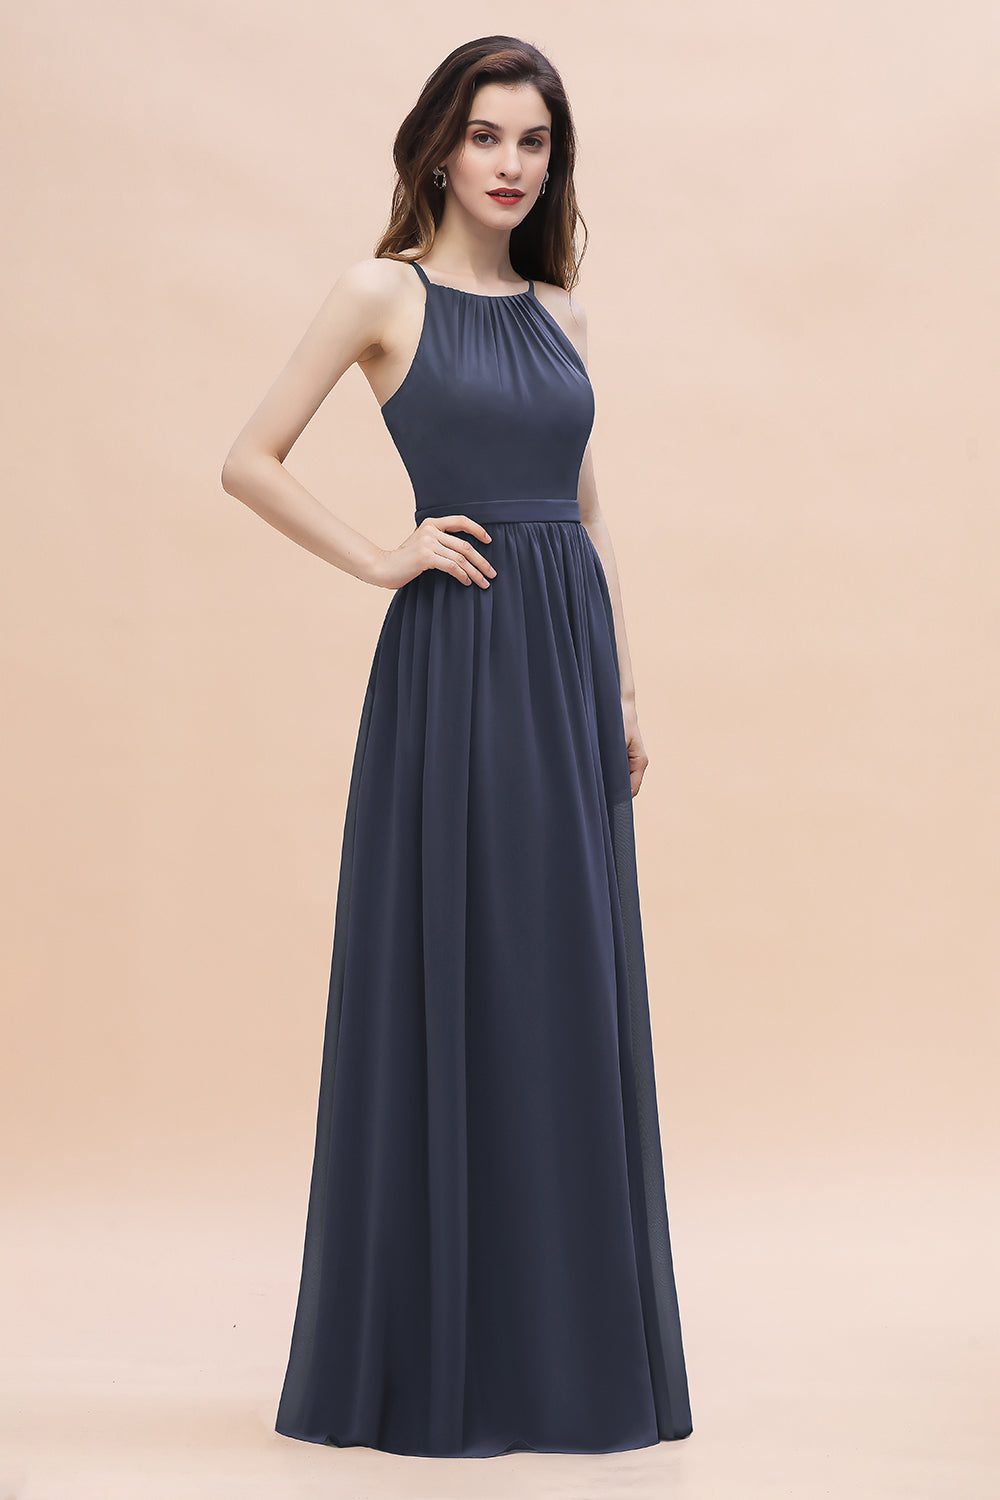 Load image into Gallery viewer, Affordable Jewel Sleeveless Stormy Chiffon Bridesmaid Dress with Ruffles Online-27dress
